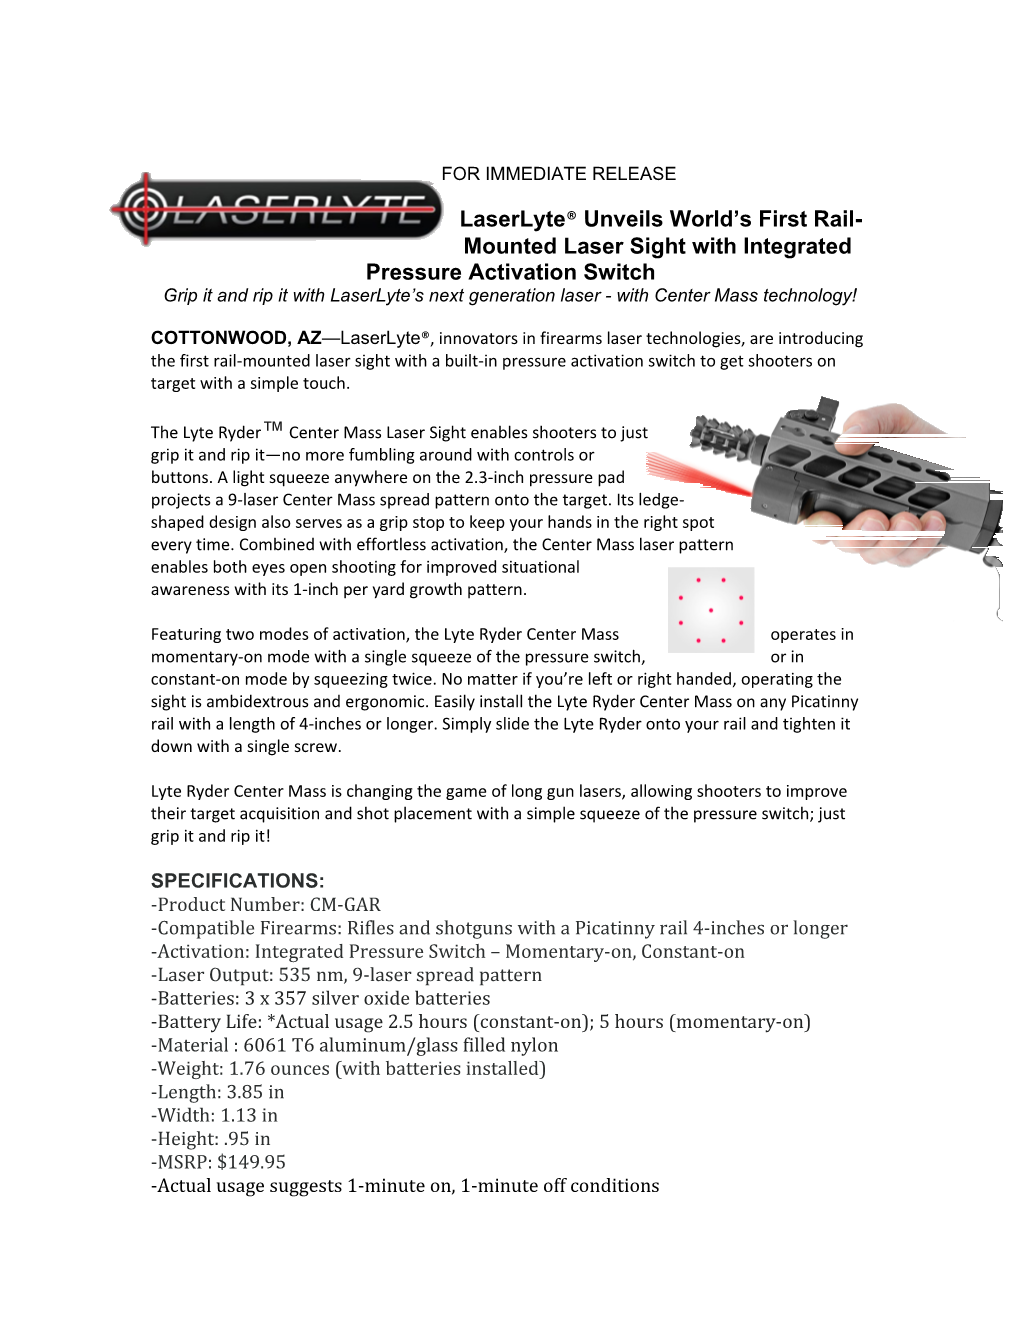 Laserlyte Unveils World S First Rail-Mounted Laser Sight with Integrated Pressure Activation